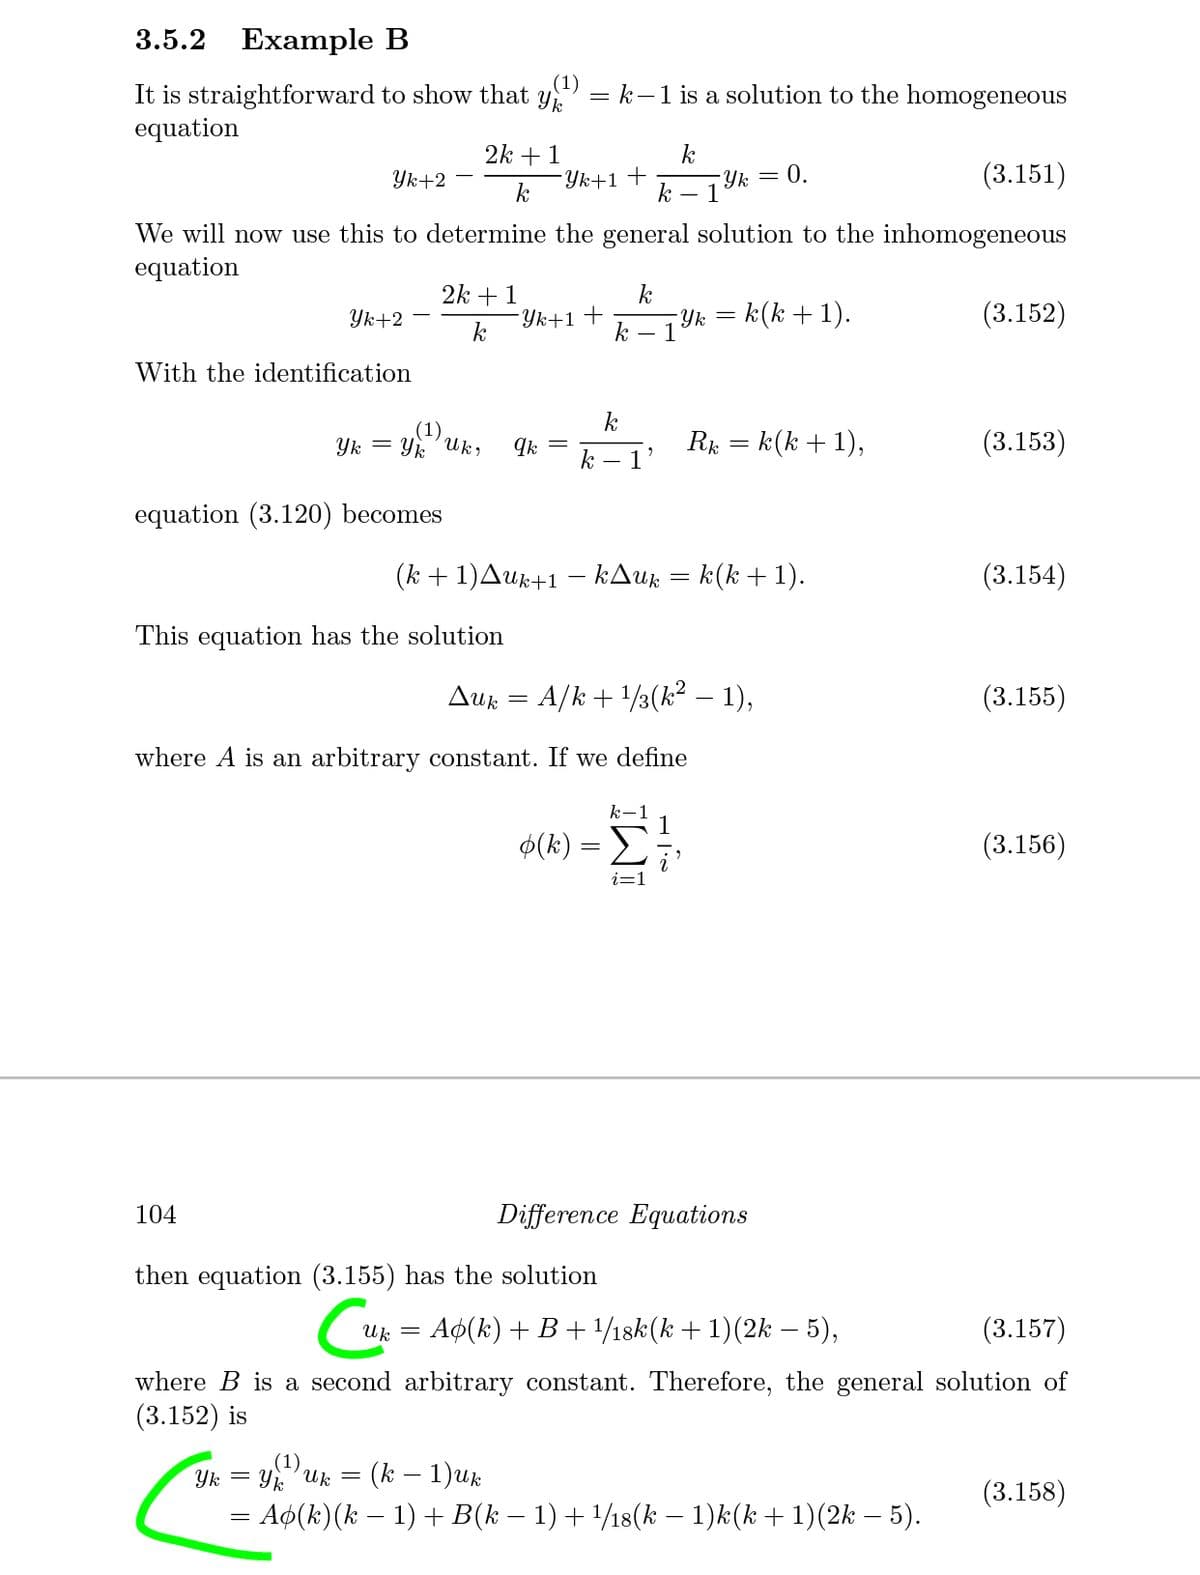 3.5.2
Example B
(1)
It is straightforward to show that y
equation
= k-1 is a solution to the homogeneous
2k +1
k
Yk+1+
Yk
k
- 1
Yk+2
= 0.
(3.151)
k
We will now use this to determine the general solution to the inhomogeneous
equation
2k +1
Yk+1+
k
Yk = k(k +1).
1
(3.152)
Yk+2
k
With the identification
k
(1)
Uk,
Yk = Yk
Ik =
k
Rk = k(k + 1),
1'
(3.153)
equation (3.120) becomes
(k + 1)Aur+1 – kAuk = k(k +1).
(3.154)
This equation has the solution
Auk = A/k + 1/3(k² – 1),
(3.155)
where A is an arbitrary constant. If we define
k-1
1
$(k)
(3.156)
104
Difference Equations
then equation (3.155) has the solution
( uk = Ap(k) +B+ ½18k(k+1)(2k – 5),
(3.157)
where B is a second arbitrary constant. Therefore, the general solution of
(3.152) is
(1)
Yk = Y Uk =
(k – 1)uk
(3.158)
= A¢(k)(k – 1) + B(k – 1) + 1/18(k – 1)k(k + 1)(2k – 5).
